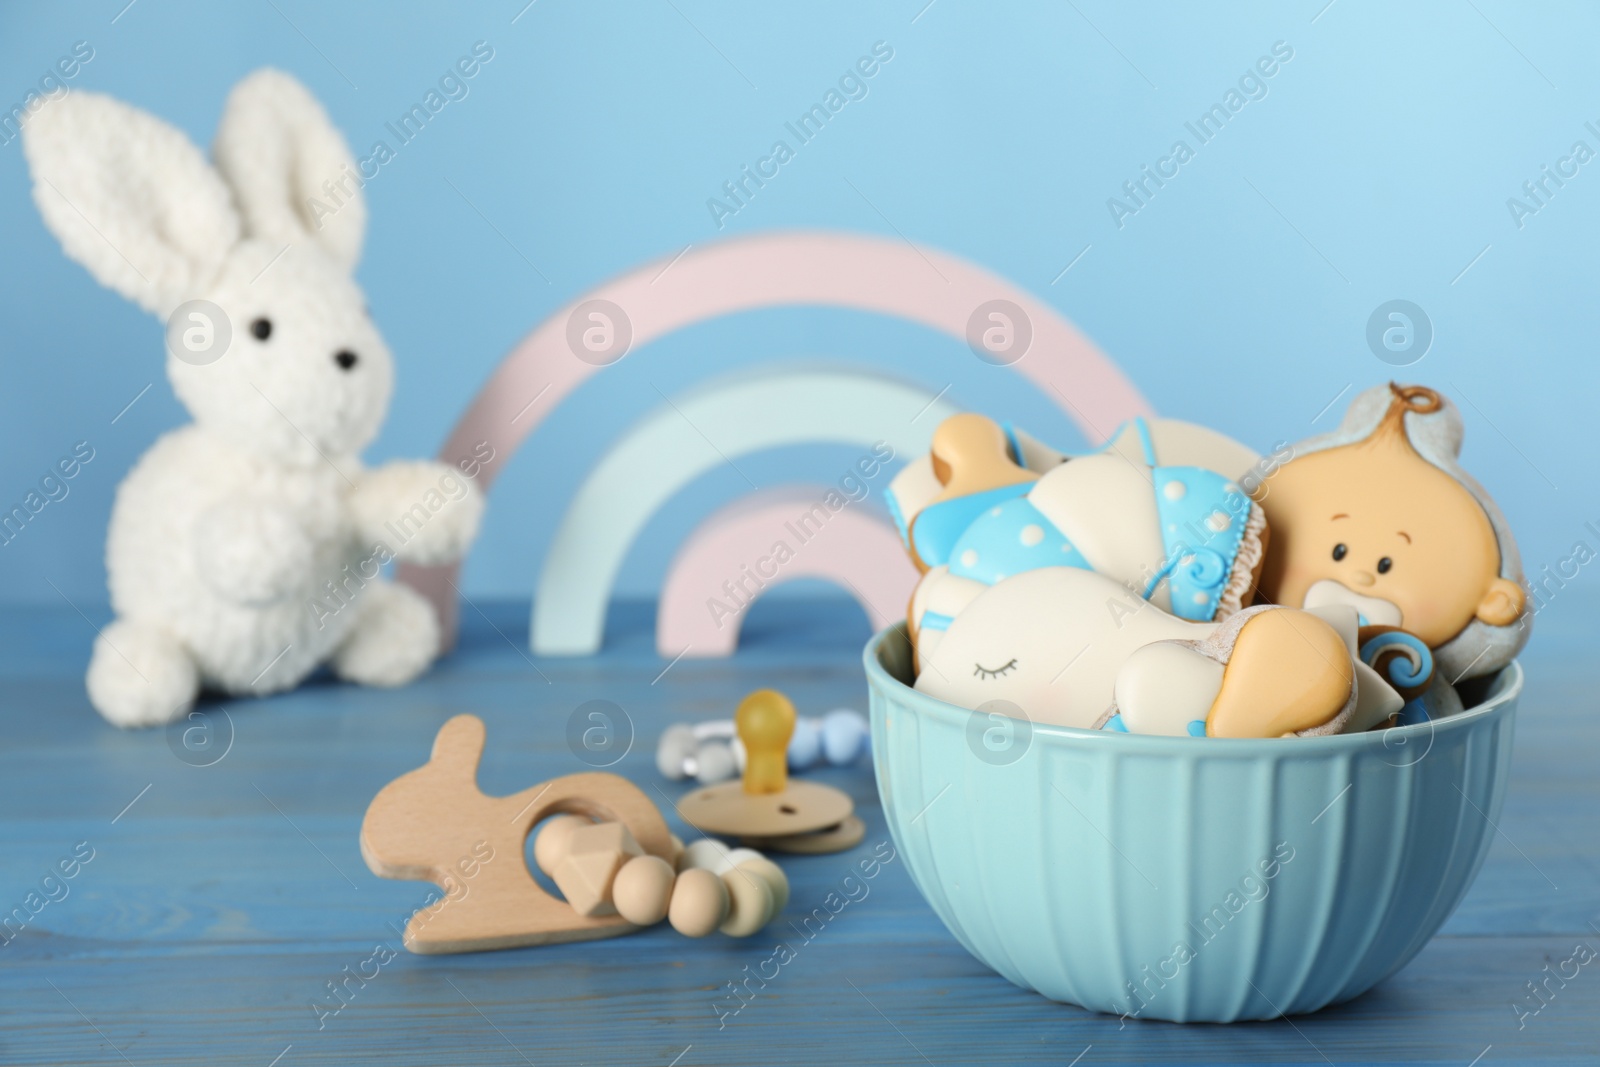 Photo of Cute tasty cookies of different shapes, pacifier and toys on light blue wooden table. Baby shower party